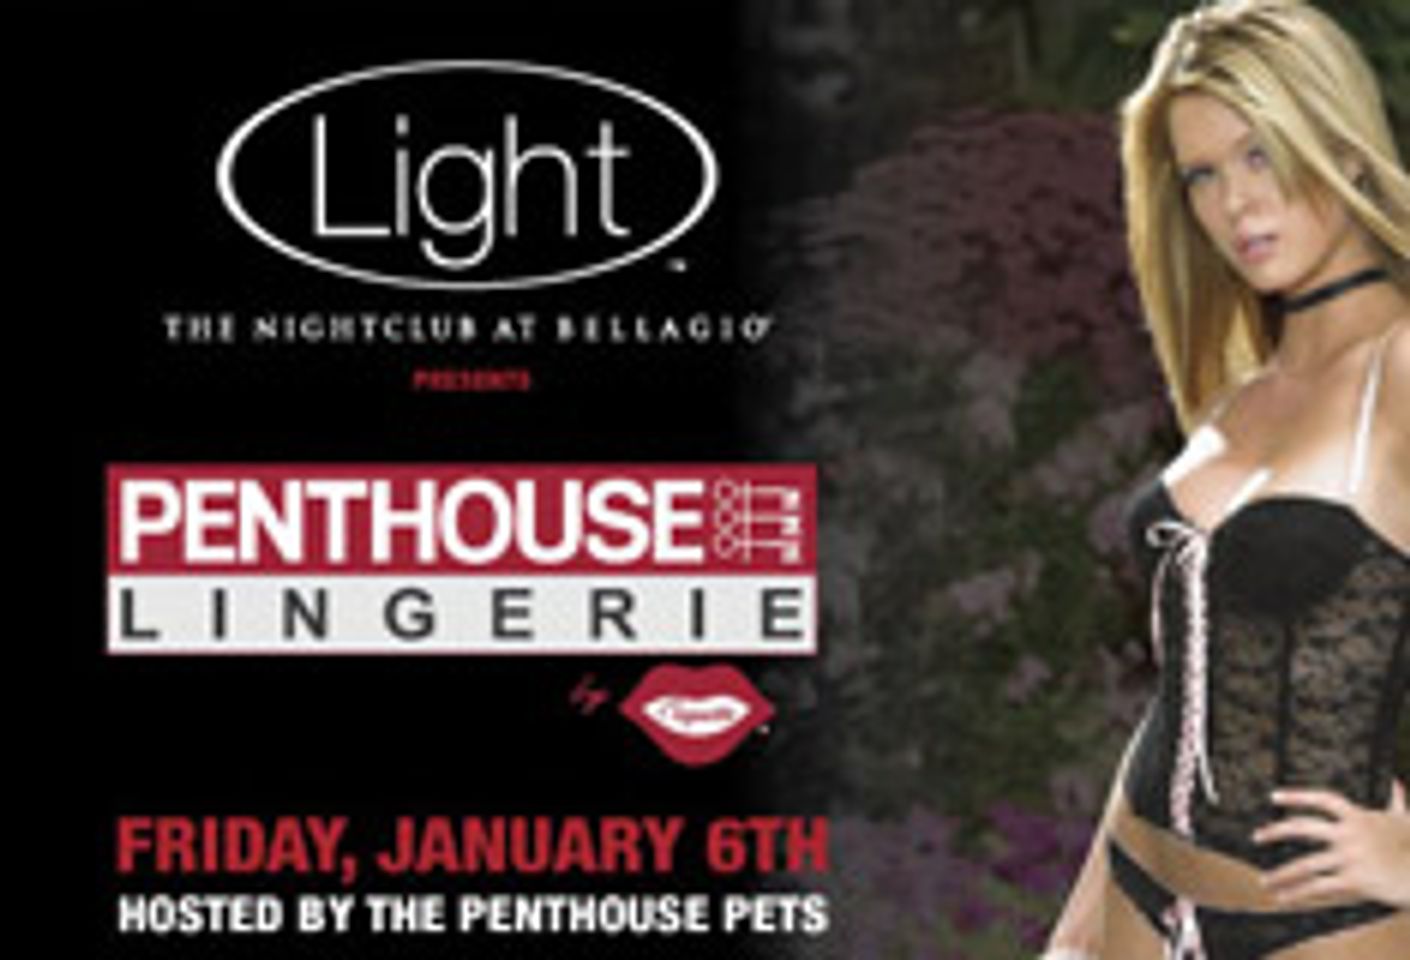 Penthouse Lingerie to Throw Party